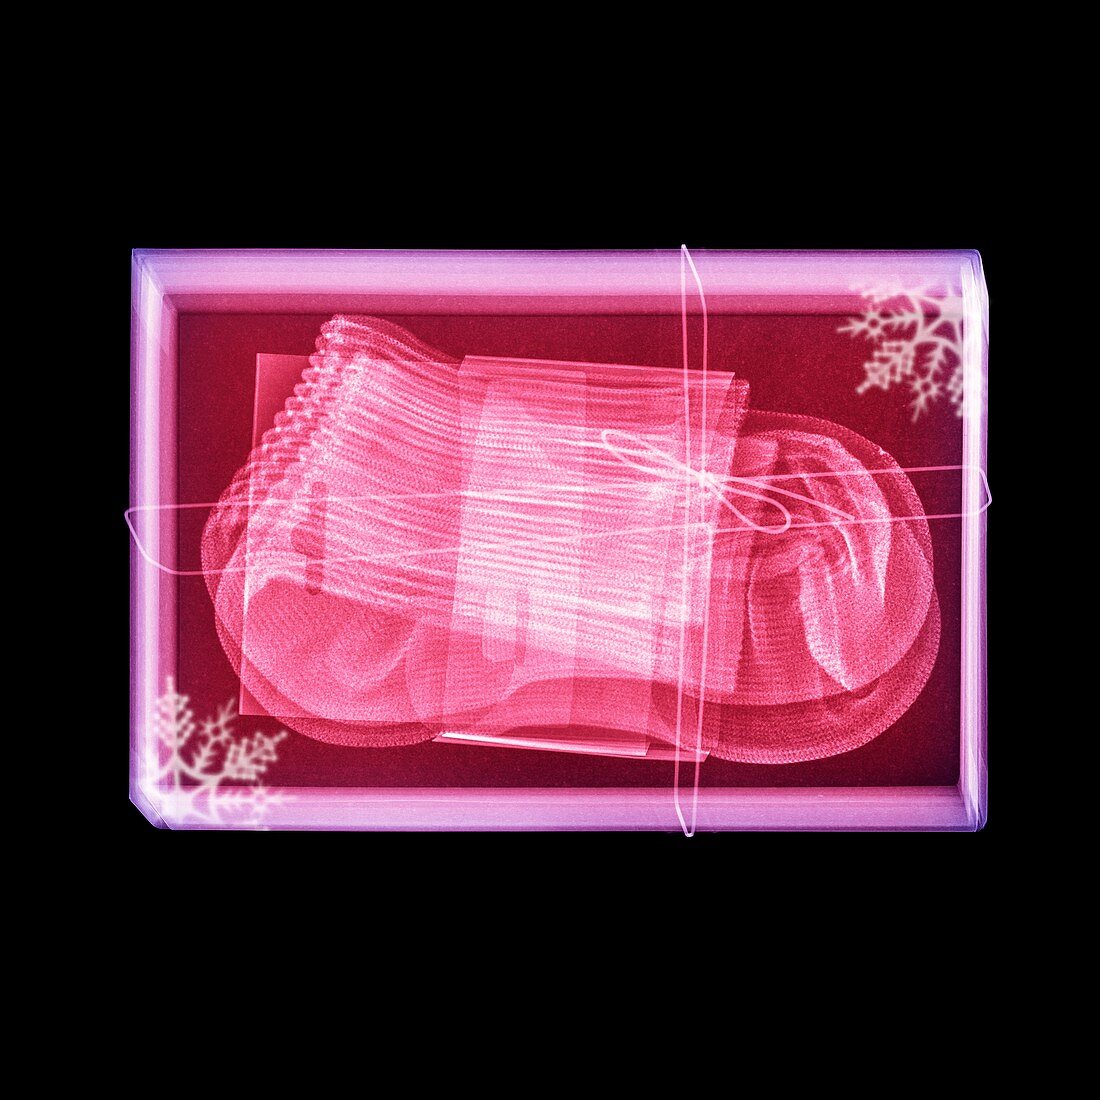 Coloured x-ray of socks in a gift box